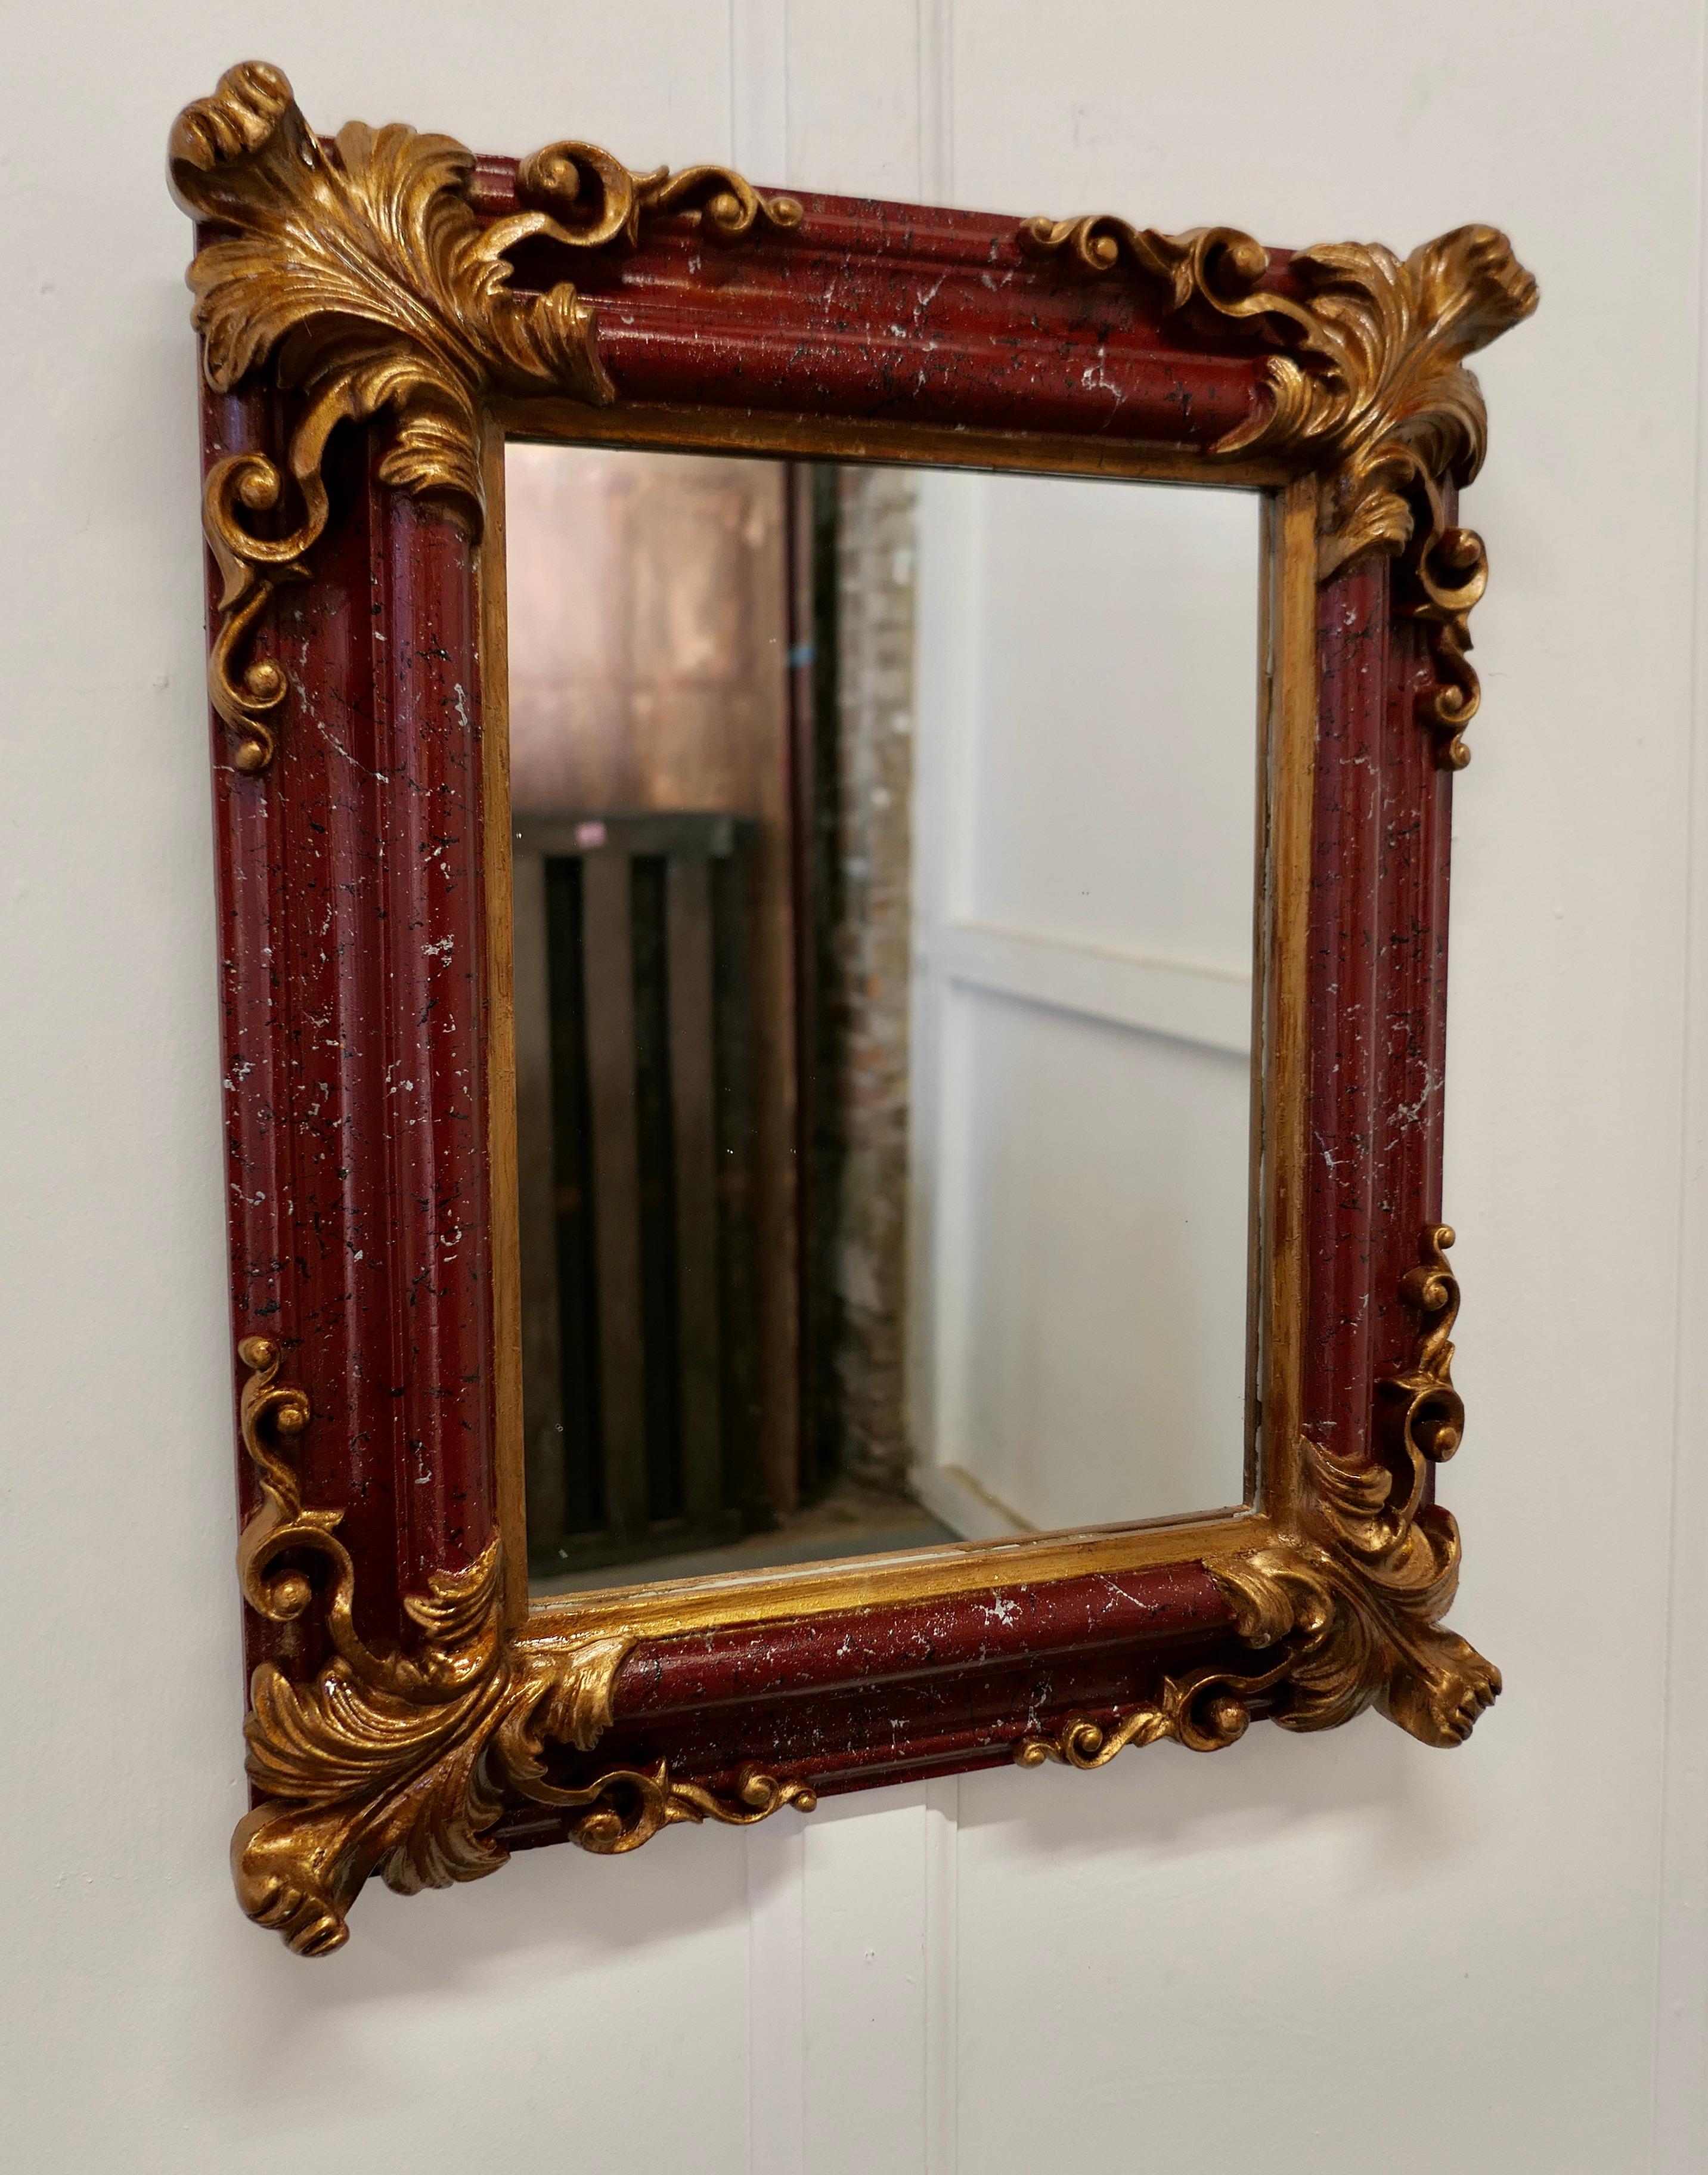 Lovely Rococo Simulated marble wall mirror

The mirror is in a Rococo Style Frame, it is almost square in shape with a 4” wide frame painted to look like Rosa Levante marble with gilded corners
This is a beautiful piece
and in good condition for